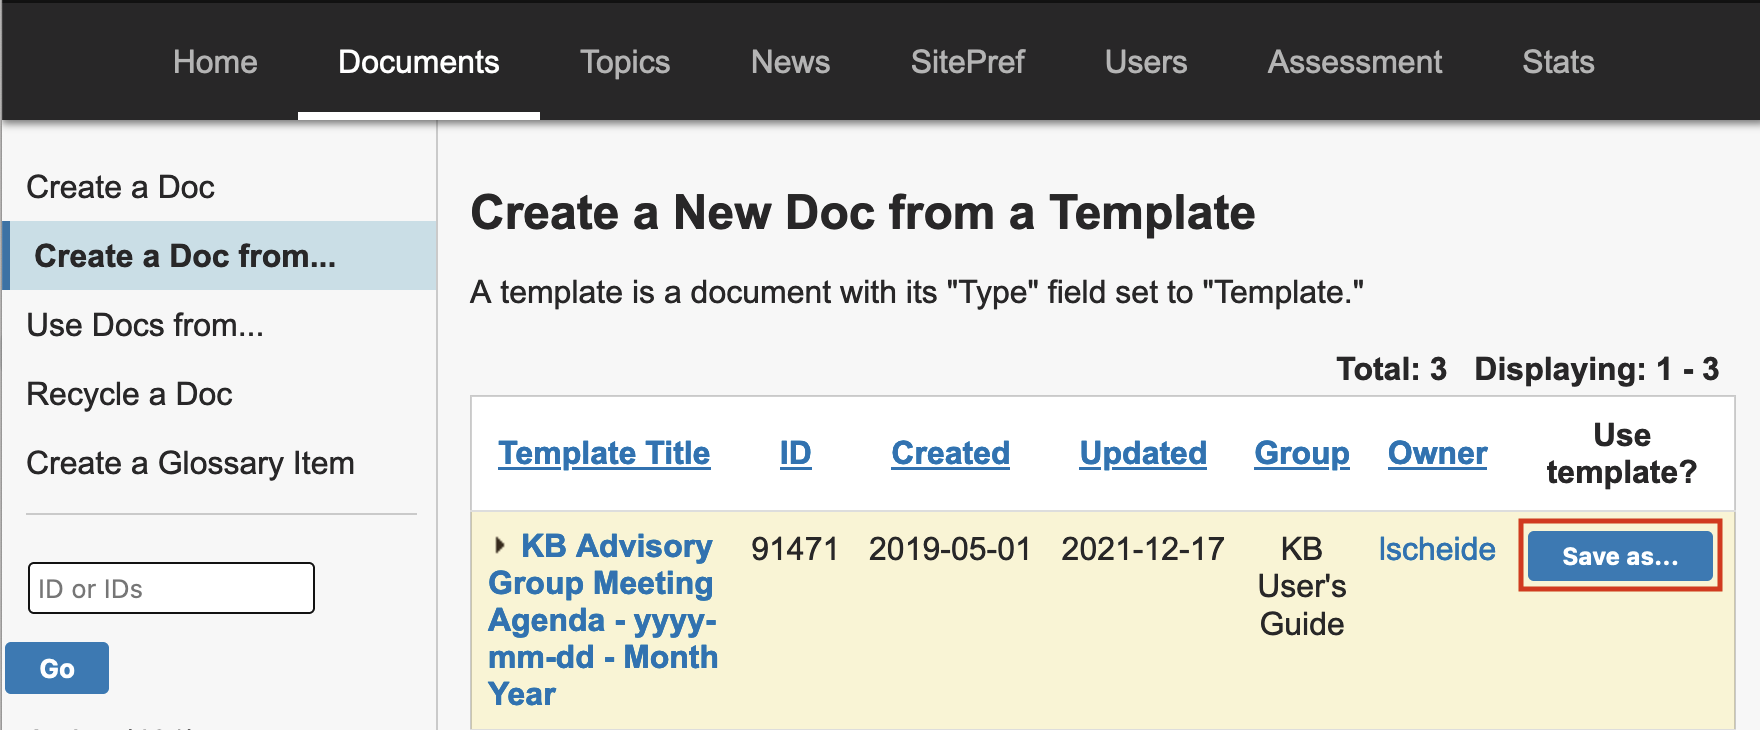 Screenshot of the "Create a new doc from template screen", which can be accessed from the left side navigation.